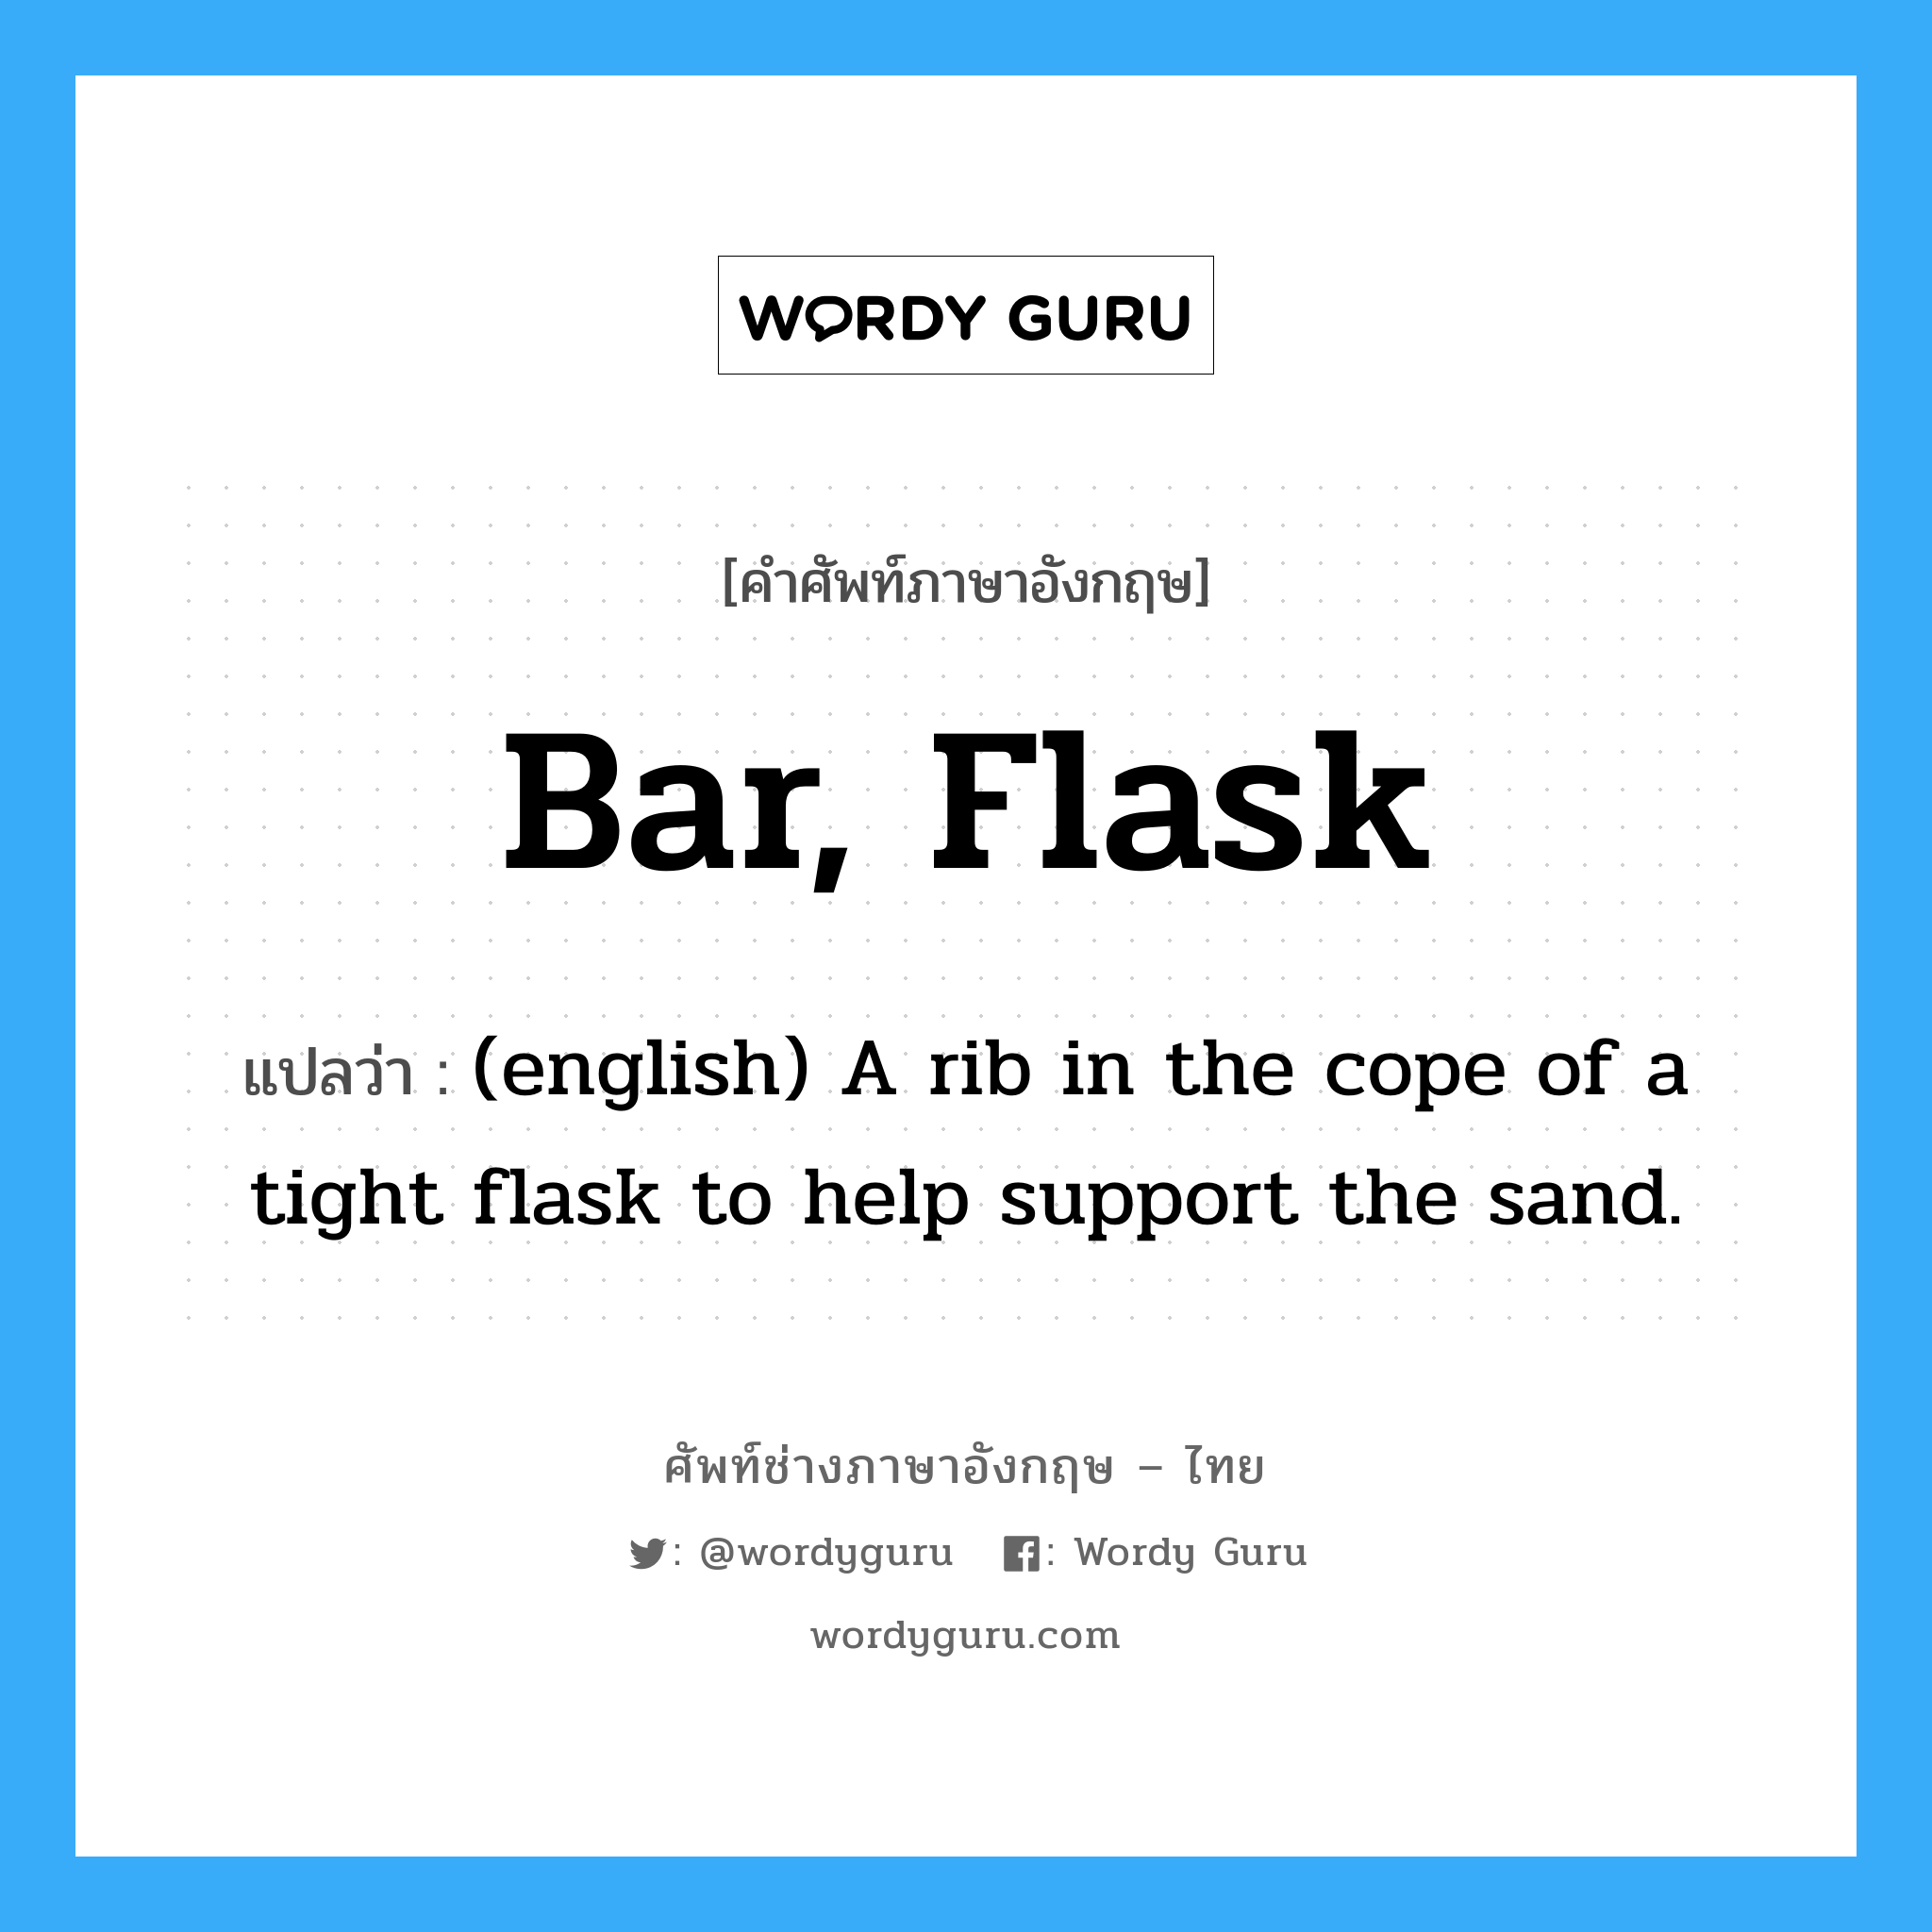 Bar, Flask แปลว่า?, คำศัพท์ช่างภาษาอังกฤษ - ไทย Bar, Flask คำศัพท์ภาษาอังกฤษ Bar, Flask แปลว่า (english) A rib in the cope of a tight flask to help support the sand.